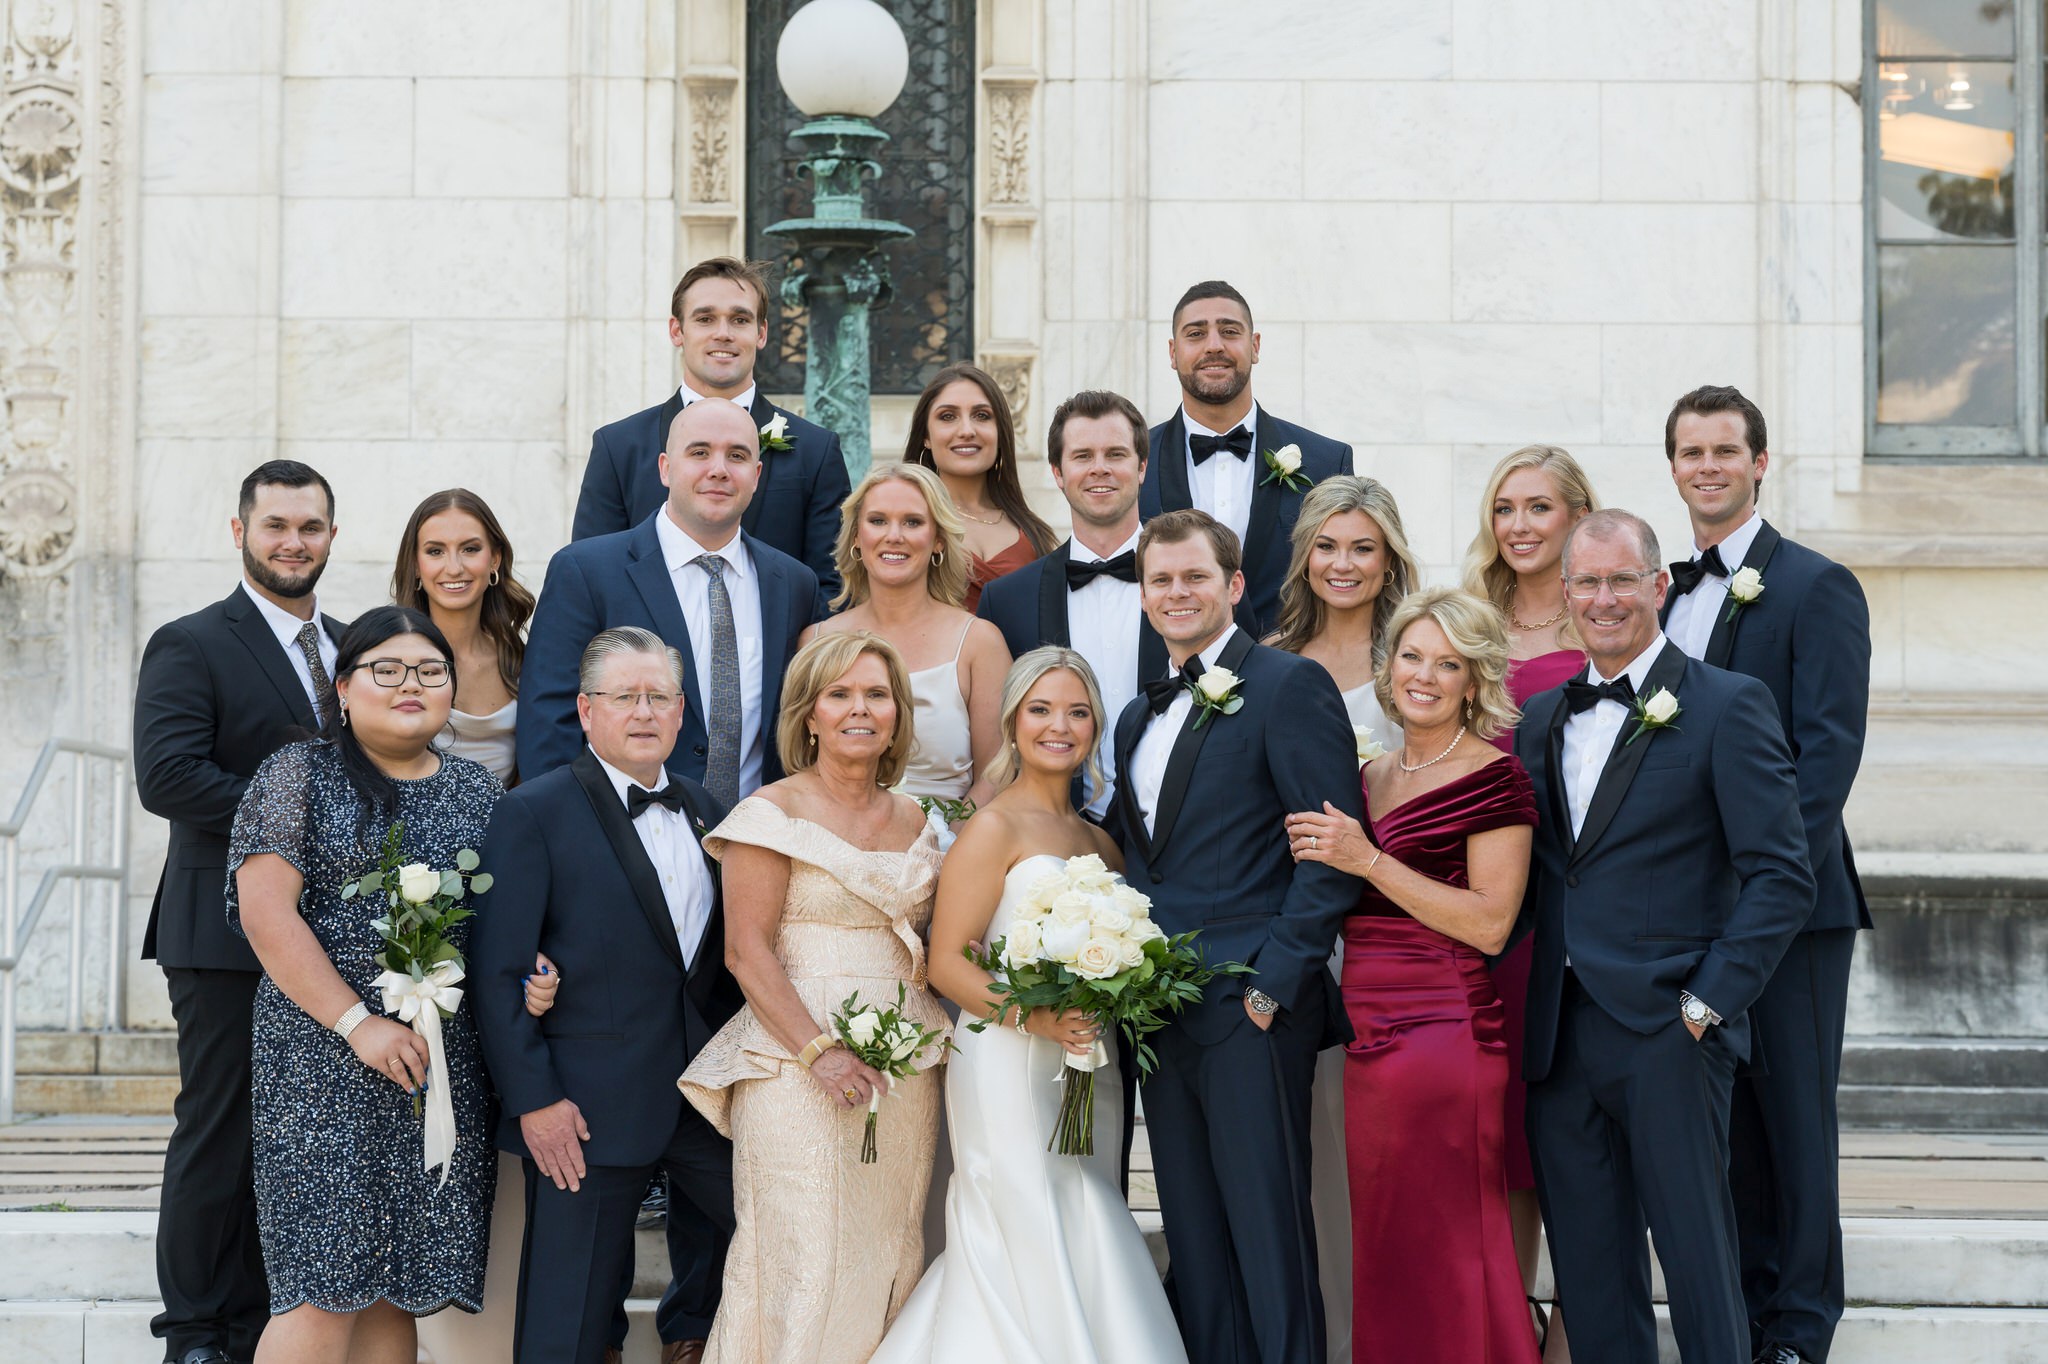 A big group wedding photo on the steps of the Detroit Public Library.  